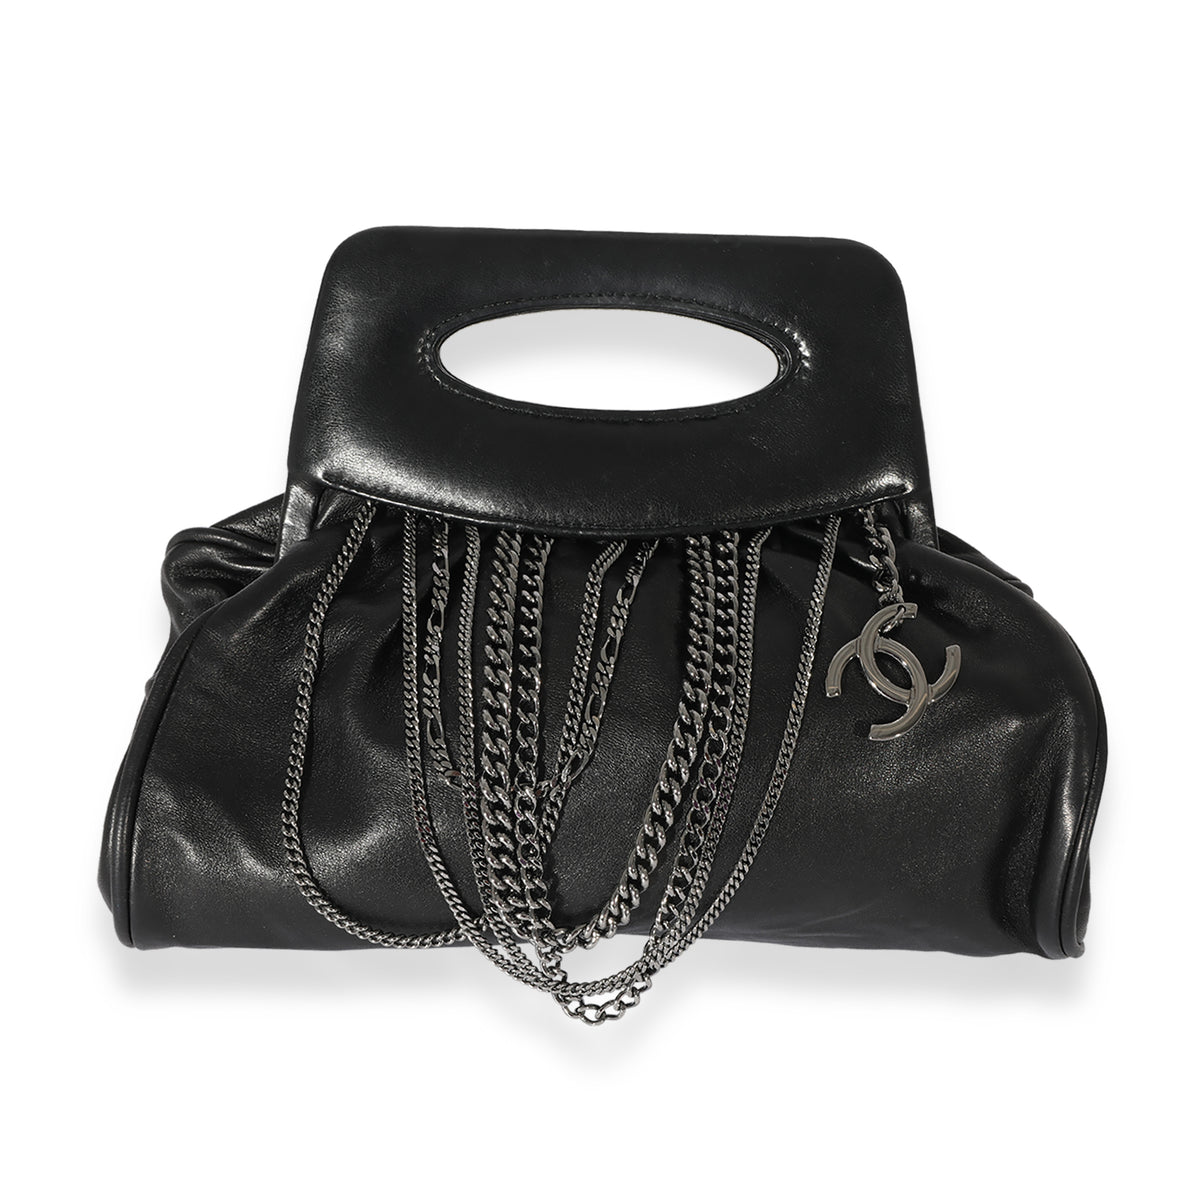 Chanel Black Leather CC Chain Link Clutch